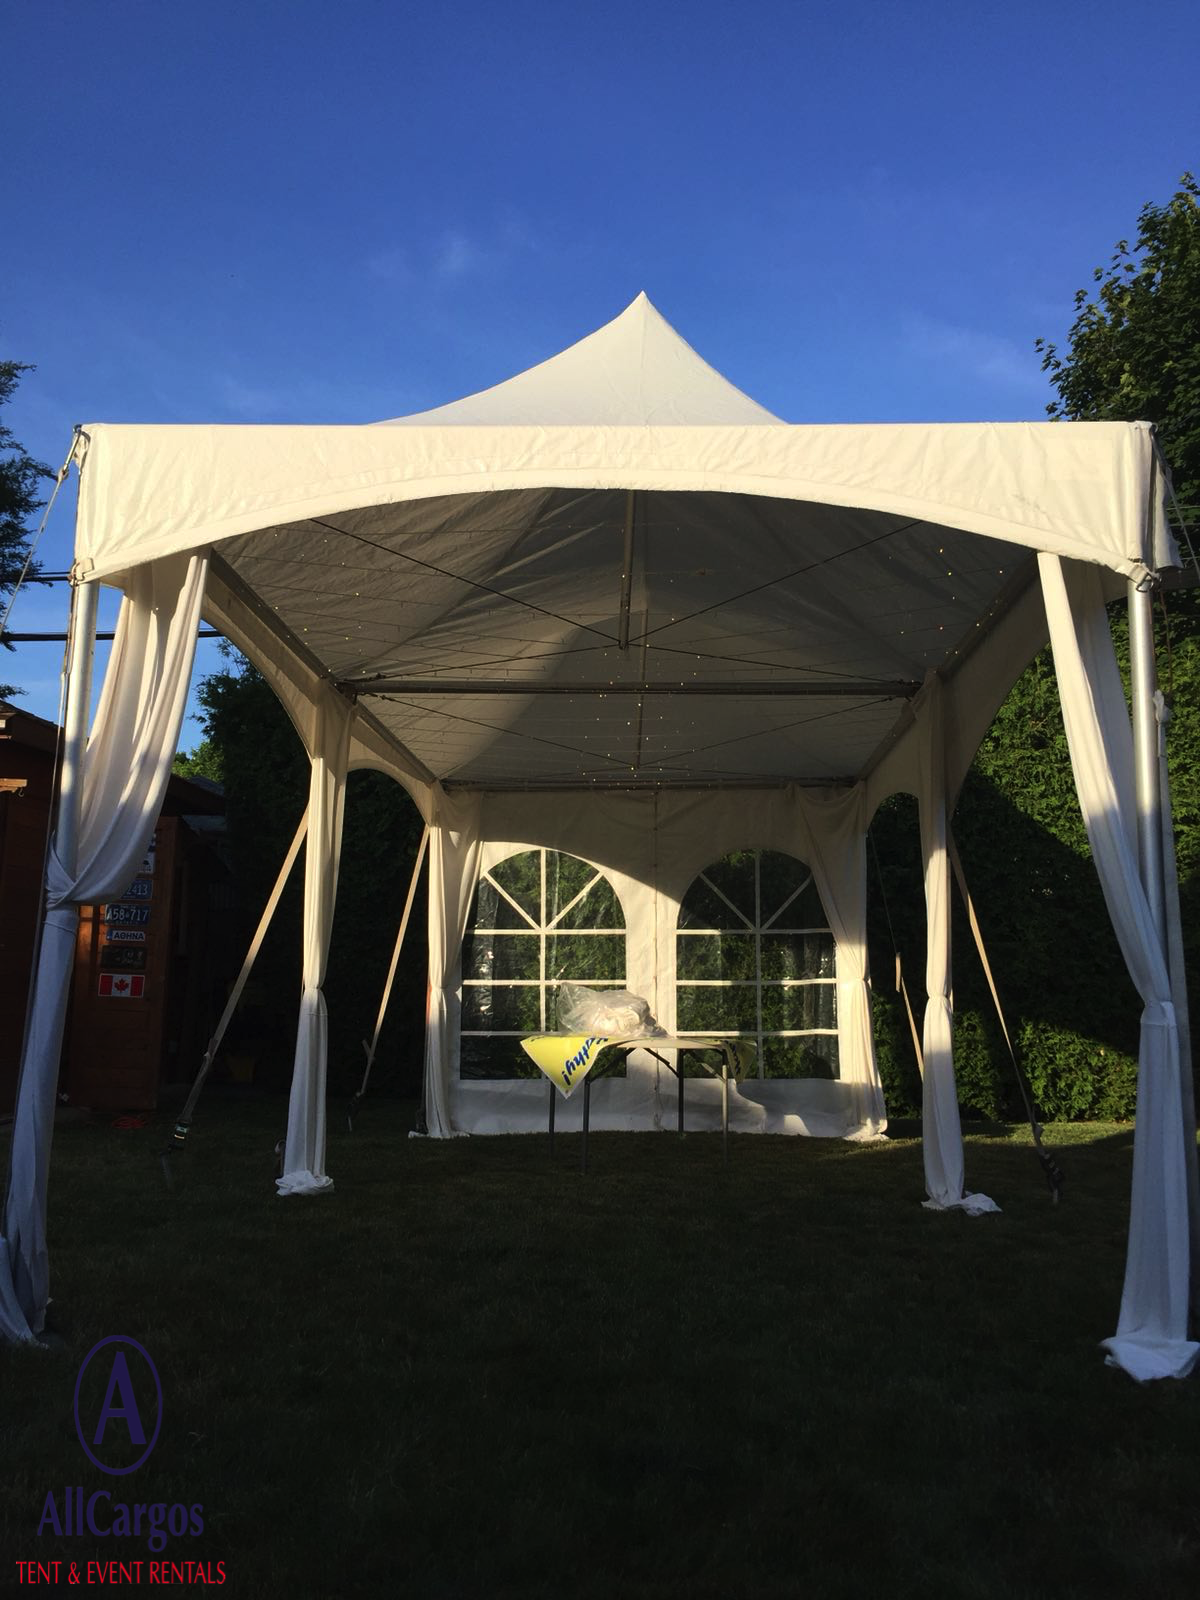 10x20 Frame Tent installed in Backyard